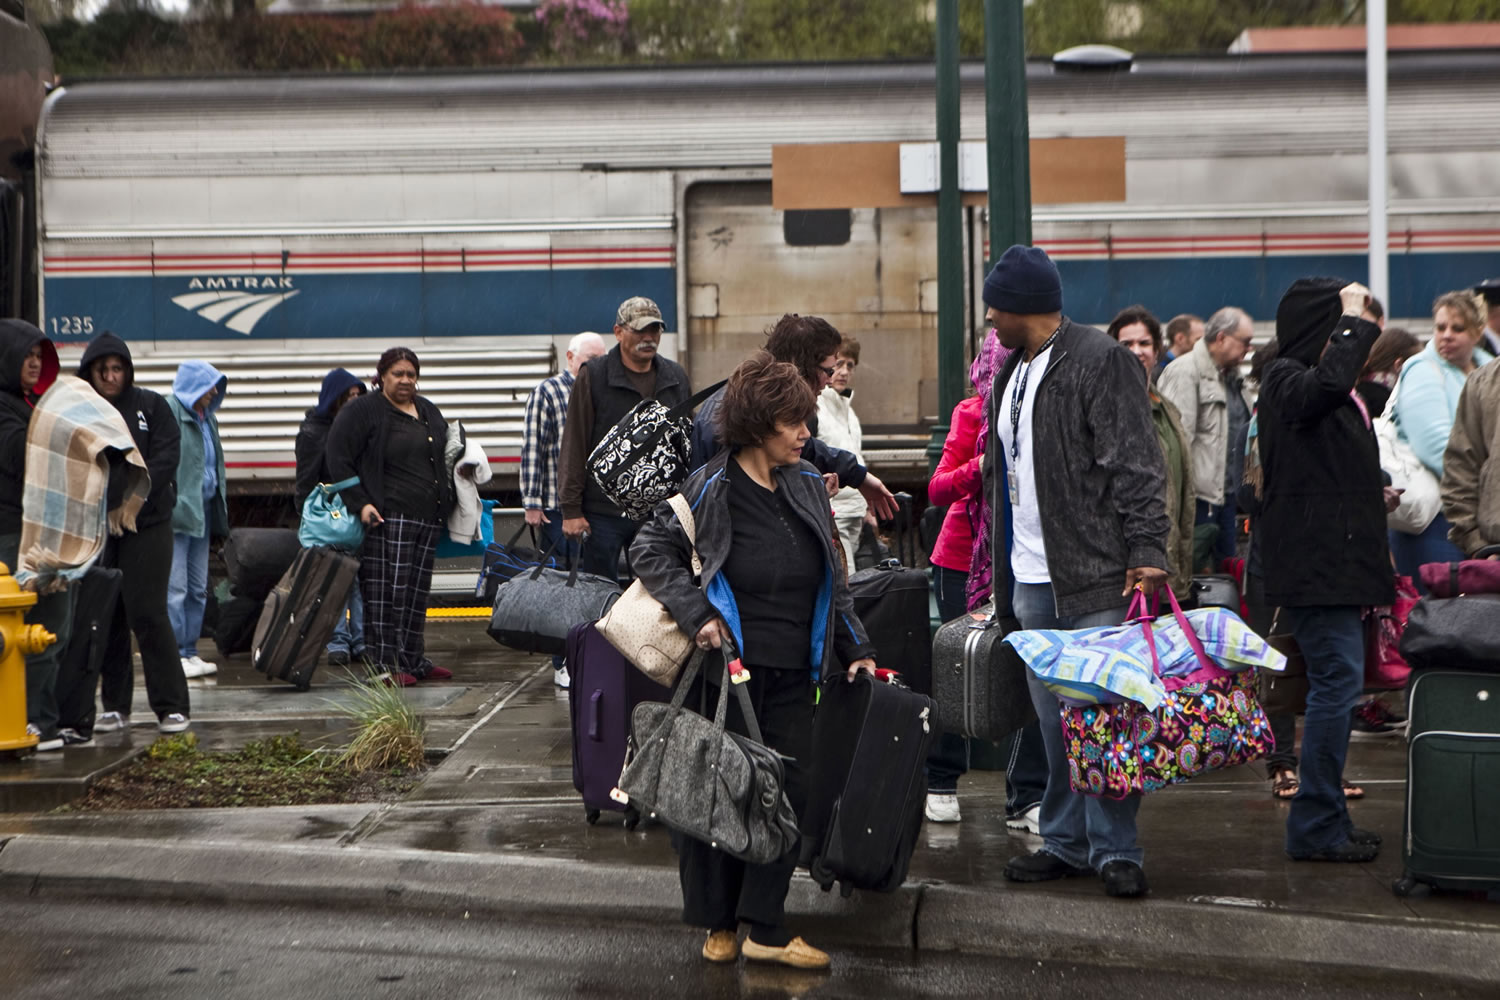 Passengers from Amtrak's Empire Builder line coming from Chicago and points east of Seattle wait at the train station in Mukilteo for buses to take them to Seattle, Edmonds and Redmond.